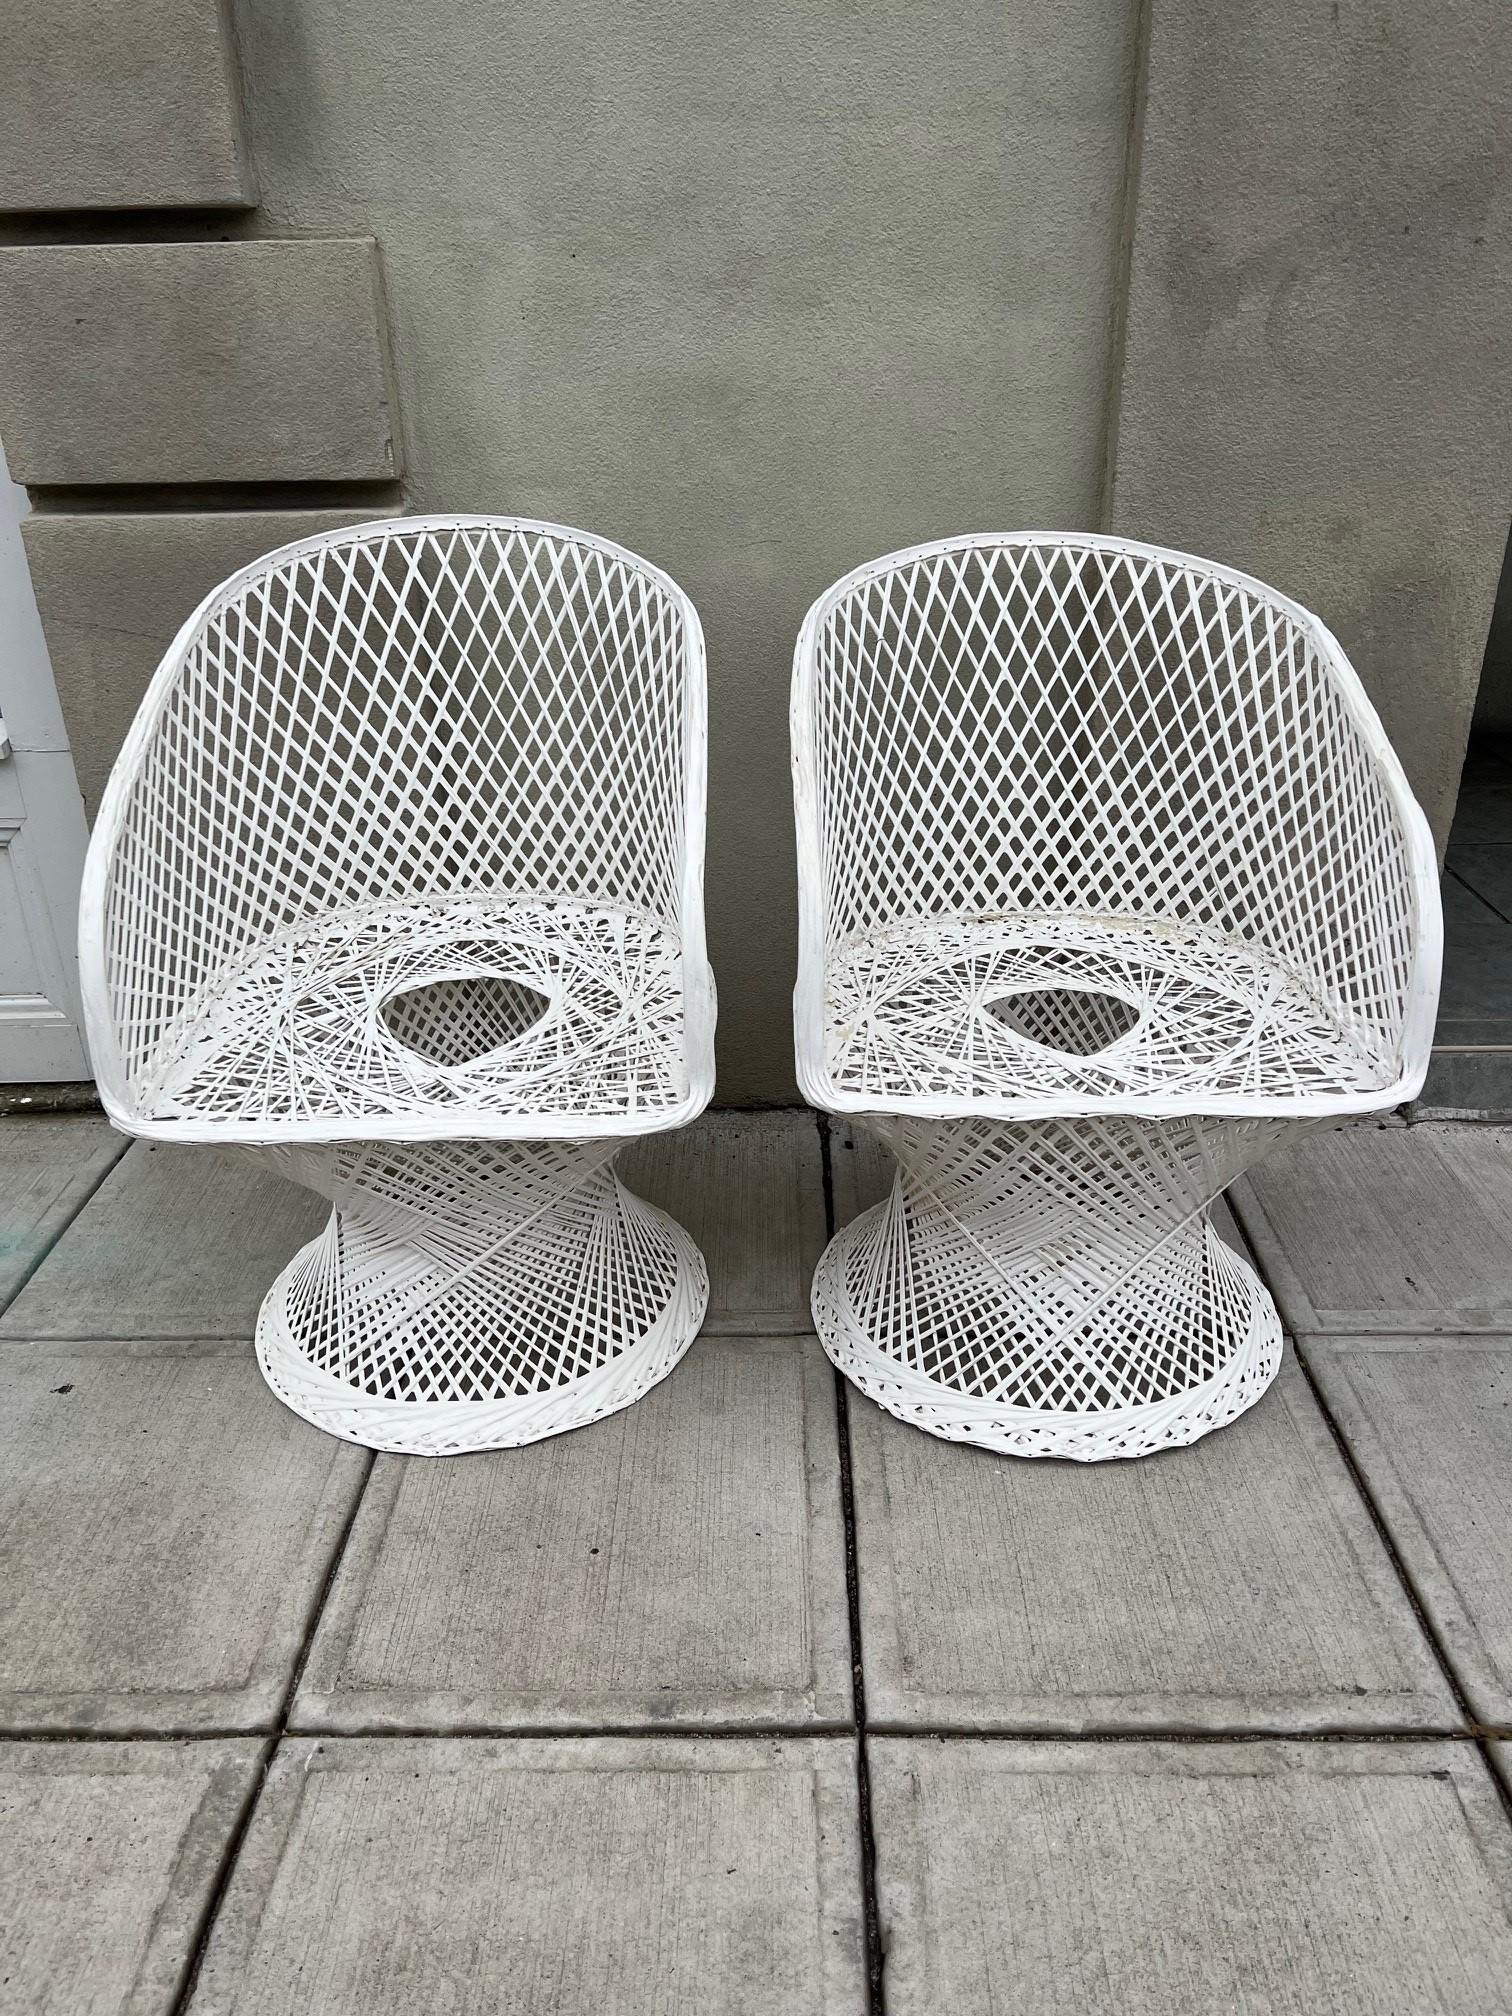 Mid Century Modern pair of chairs by Russel Woodard. Made from a strong durable spun fiberglass which can be used either in or outdoors. The two chairs came from a Greenwich Ct. estate and are in great condition only missing the cushions. This spun